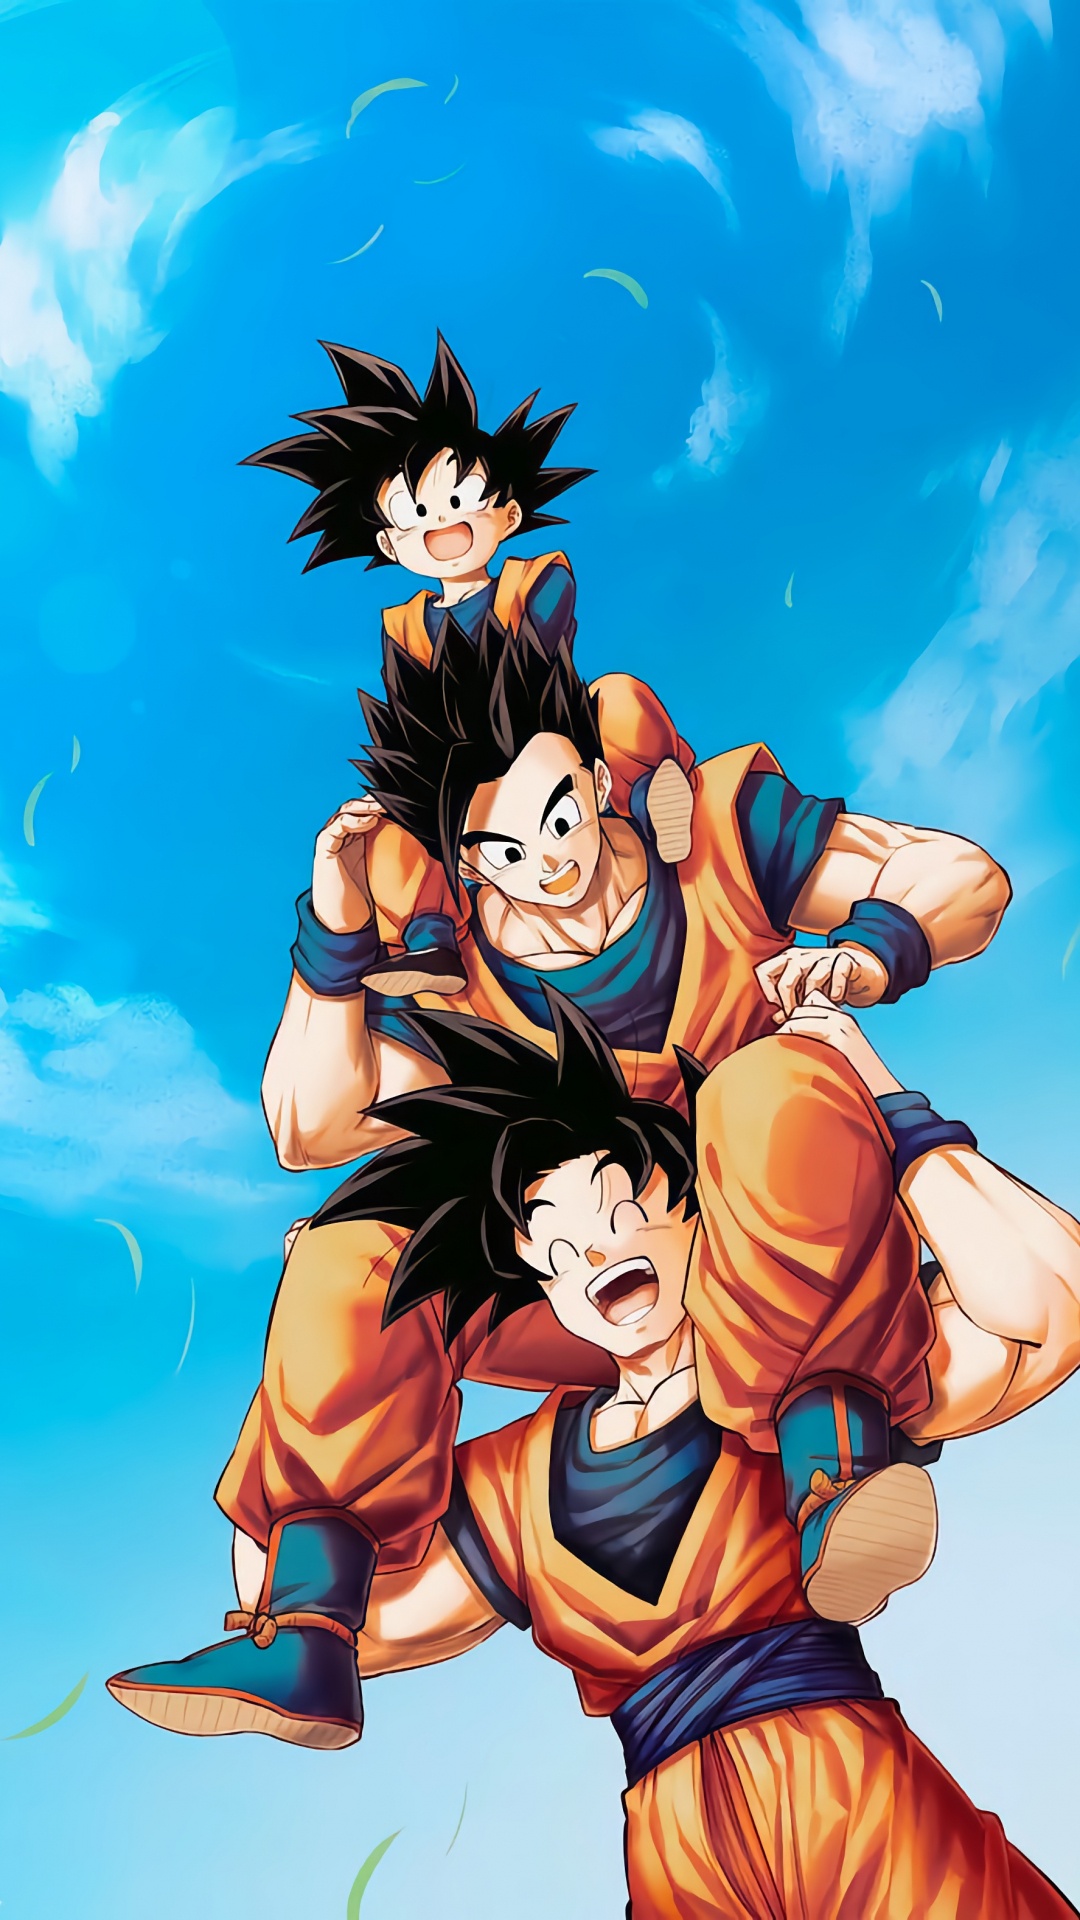 1080x1920 Dragon Ball Wallpapers for Android Mobile Smartphone [Full HD]